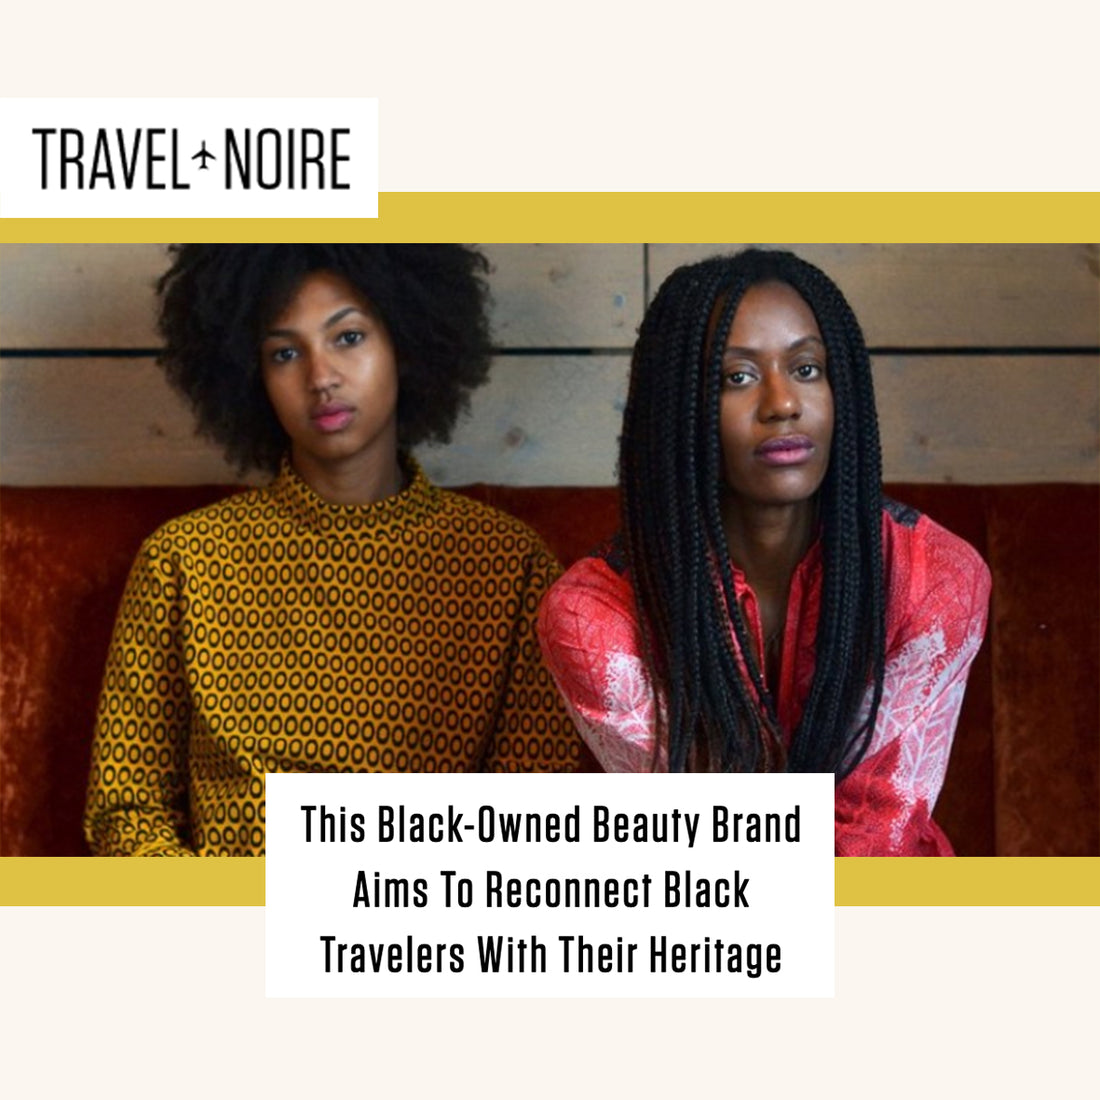 TRAVEL NOIRE: This Black-Owned Beauty Brand Aims To Reconnect Black Travellers With Their Heritage